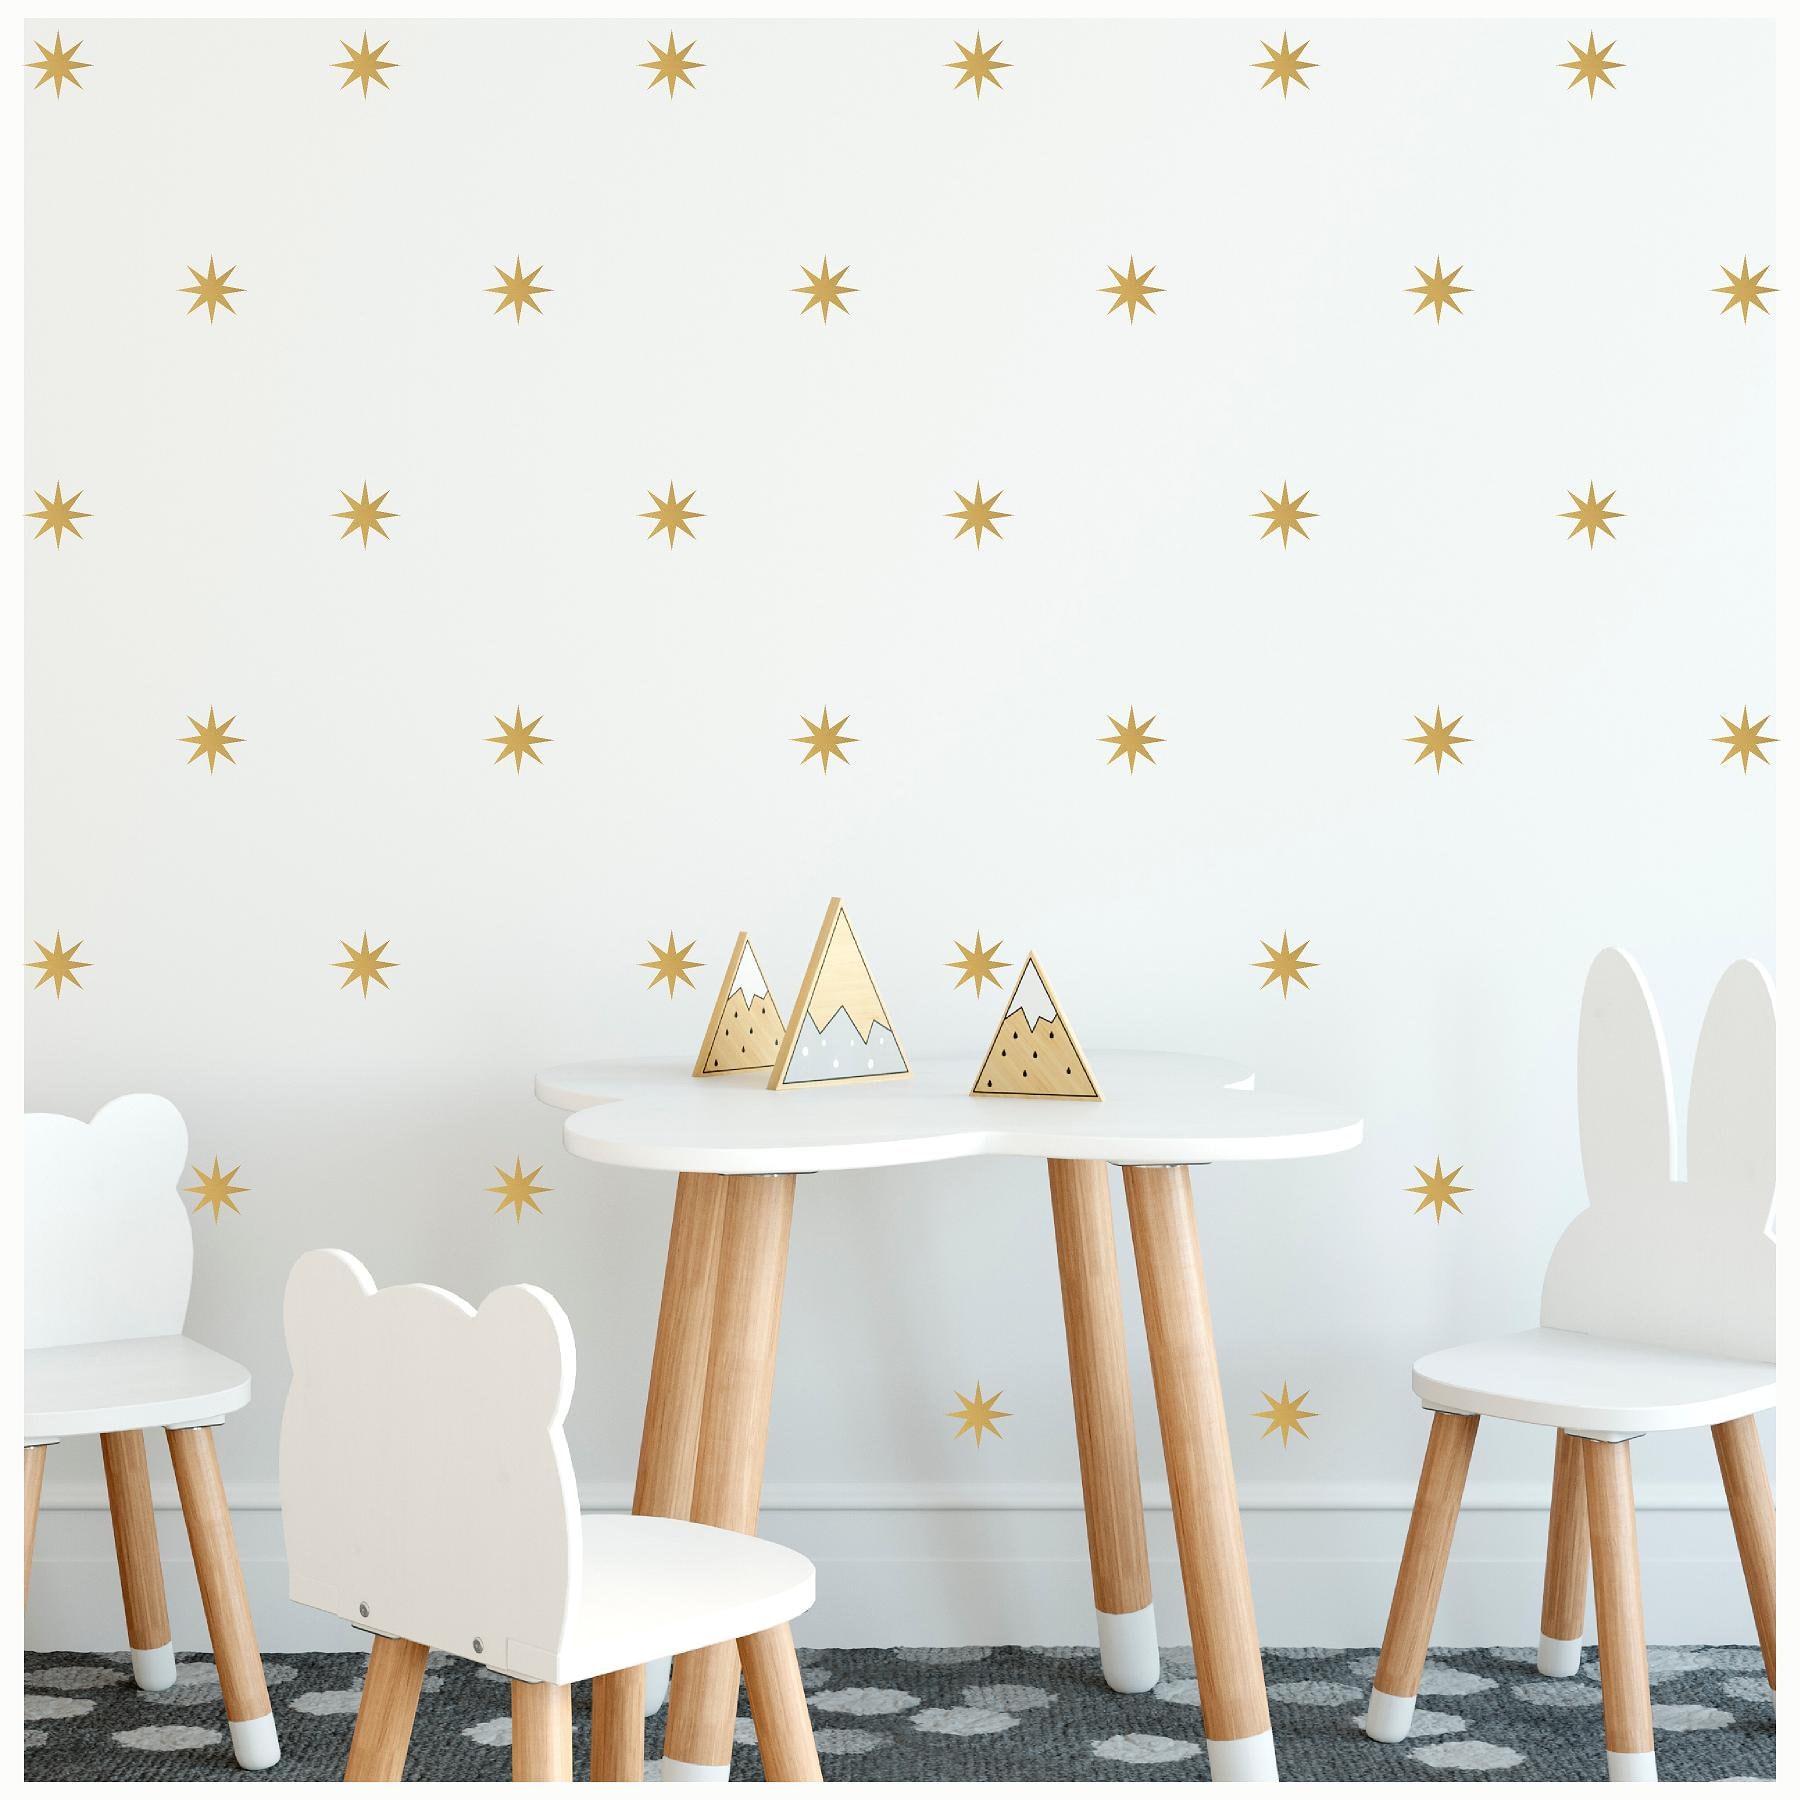 Star Bursts Vinyl Decals | 3+ Sizes & 35+ Colors To Choose Vinyl Lettering Quote Wall Saying Decal Sticker Art